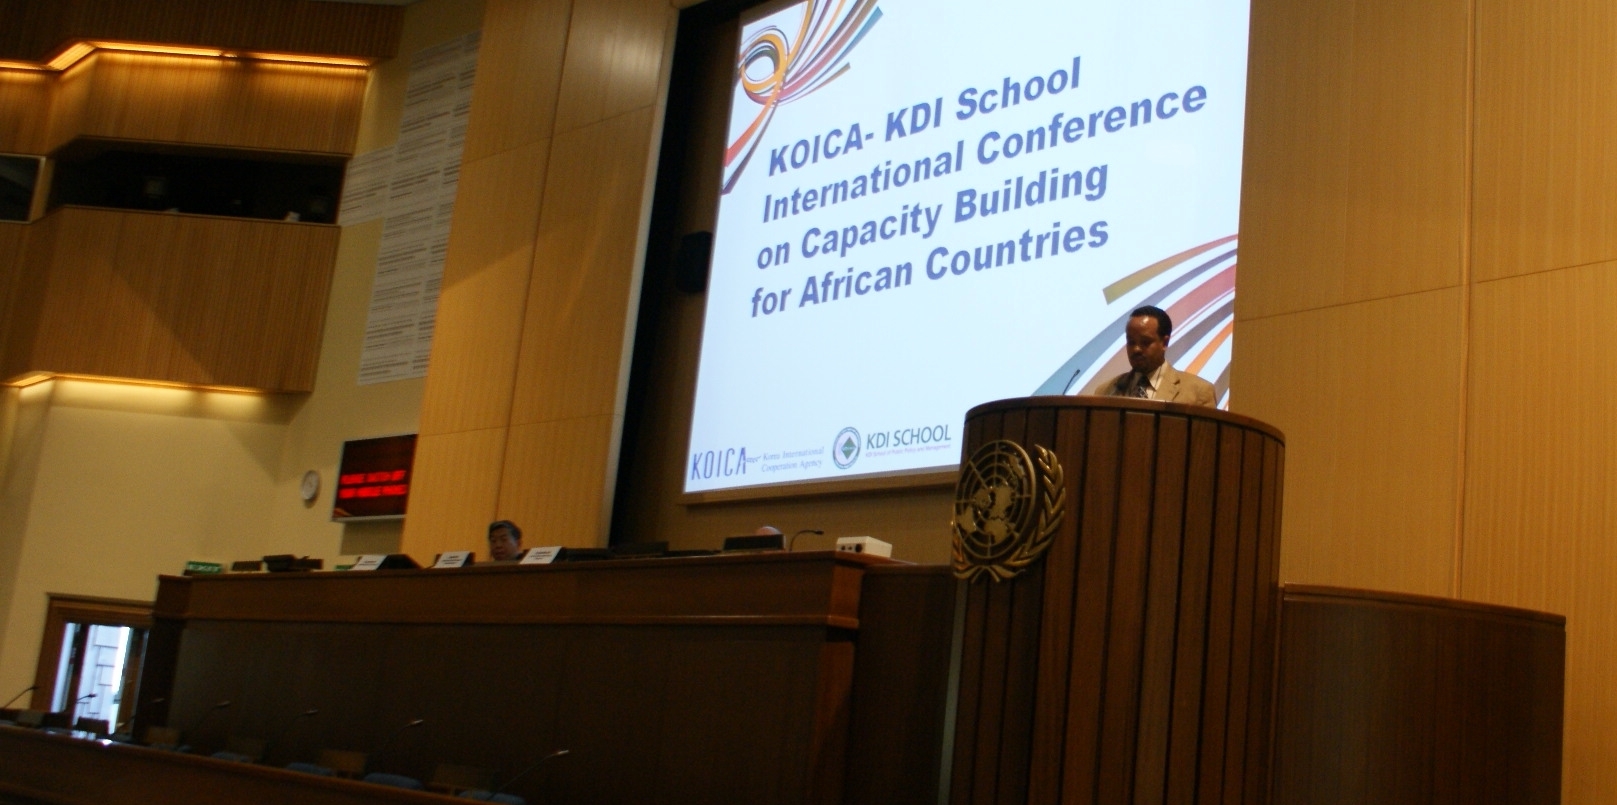 KOICA-KDI School International Conference on Capacity Building for African Countries